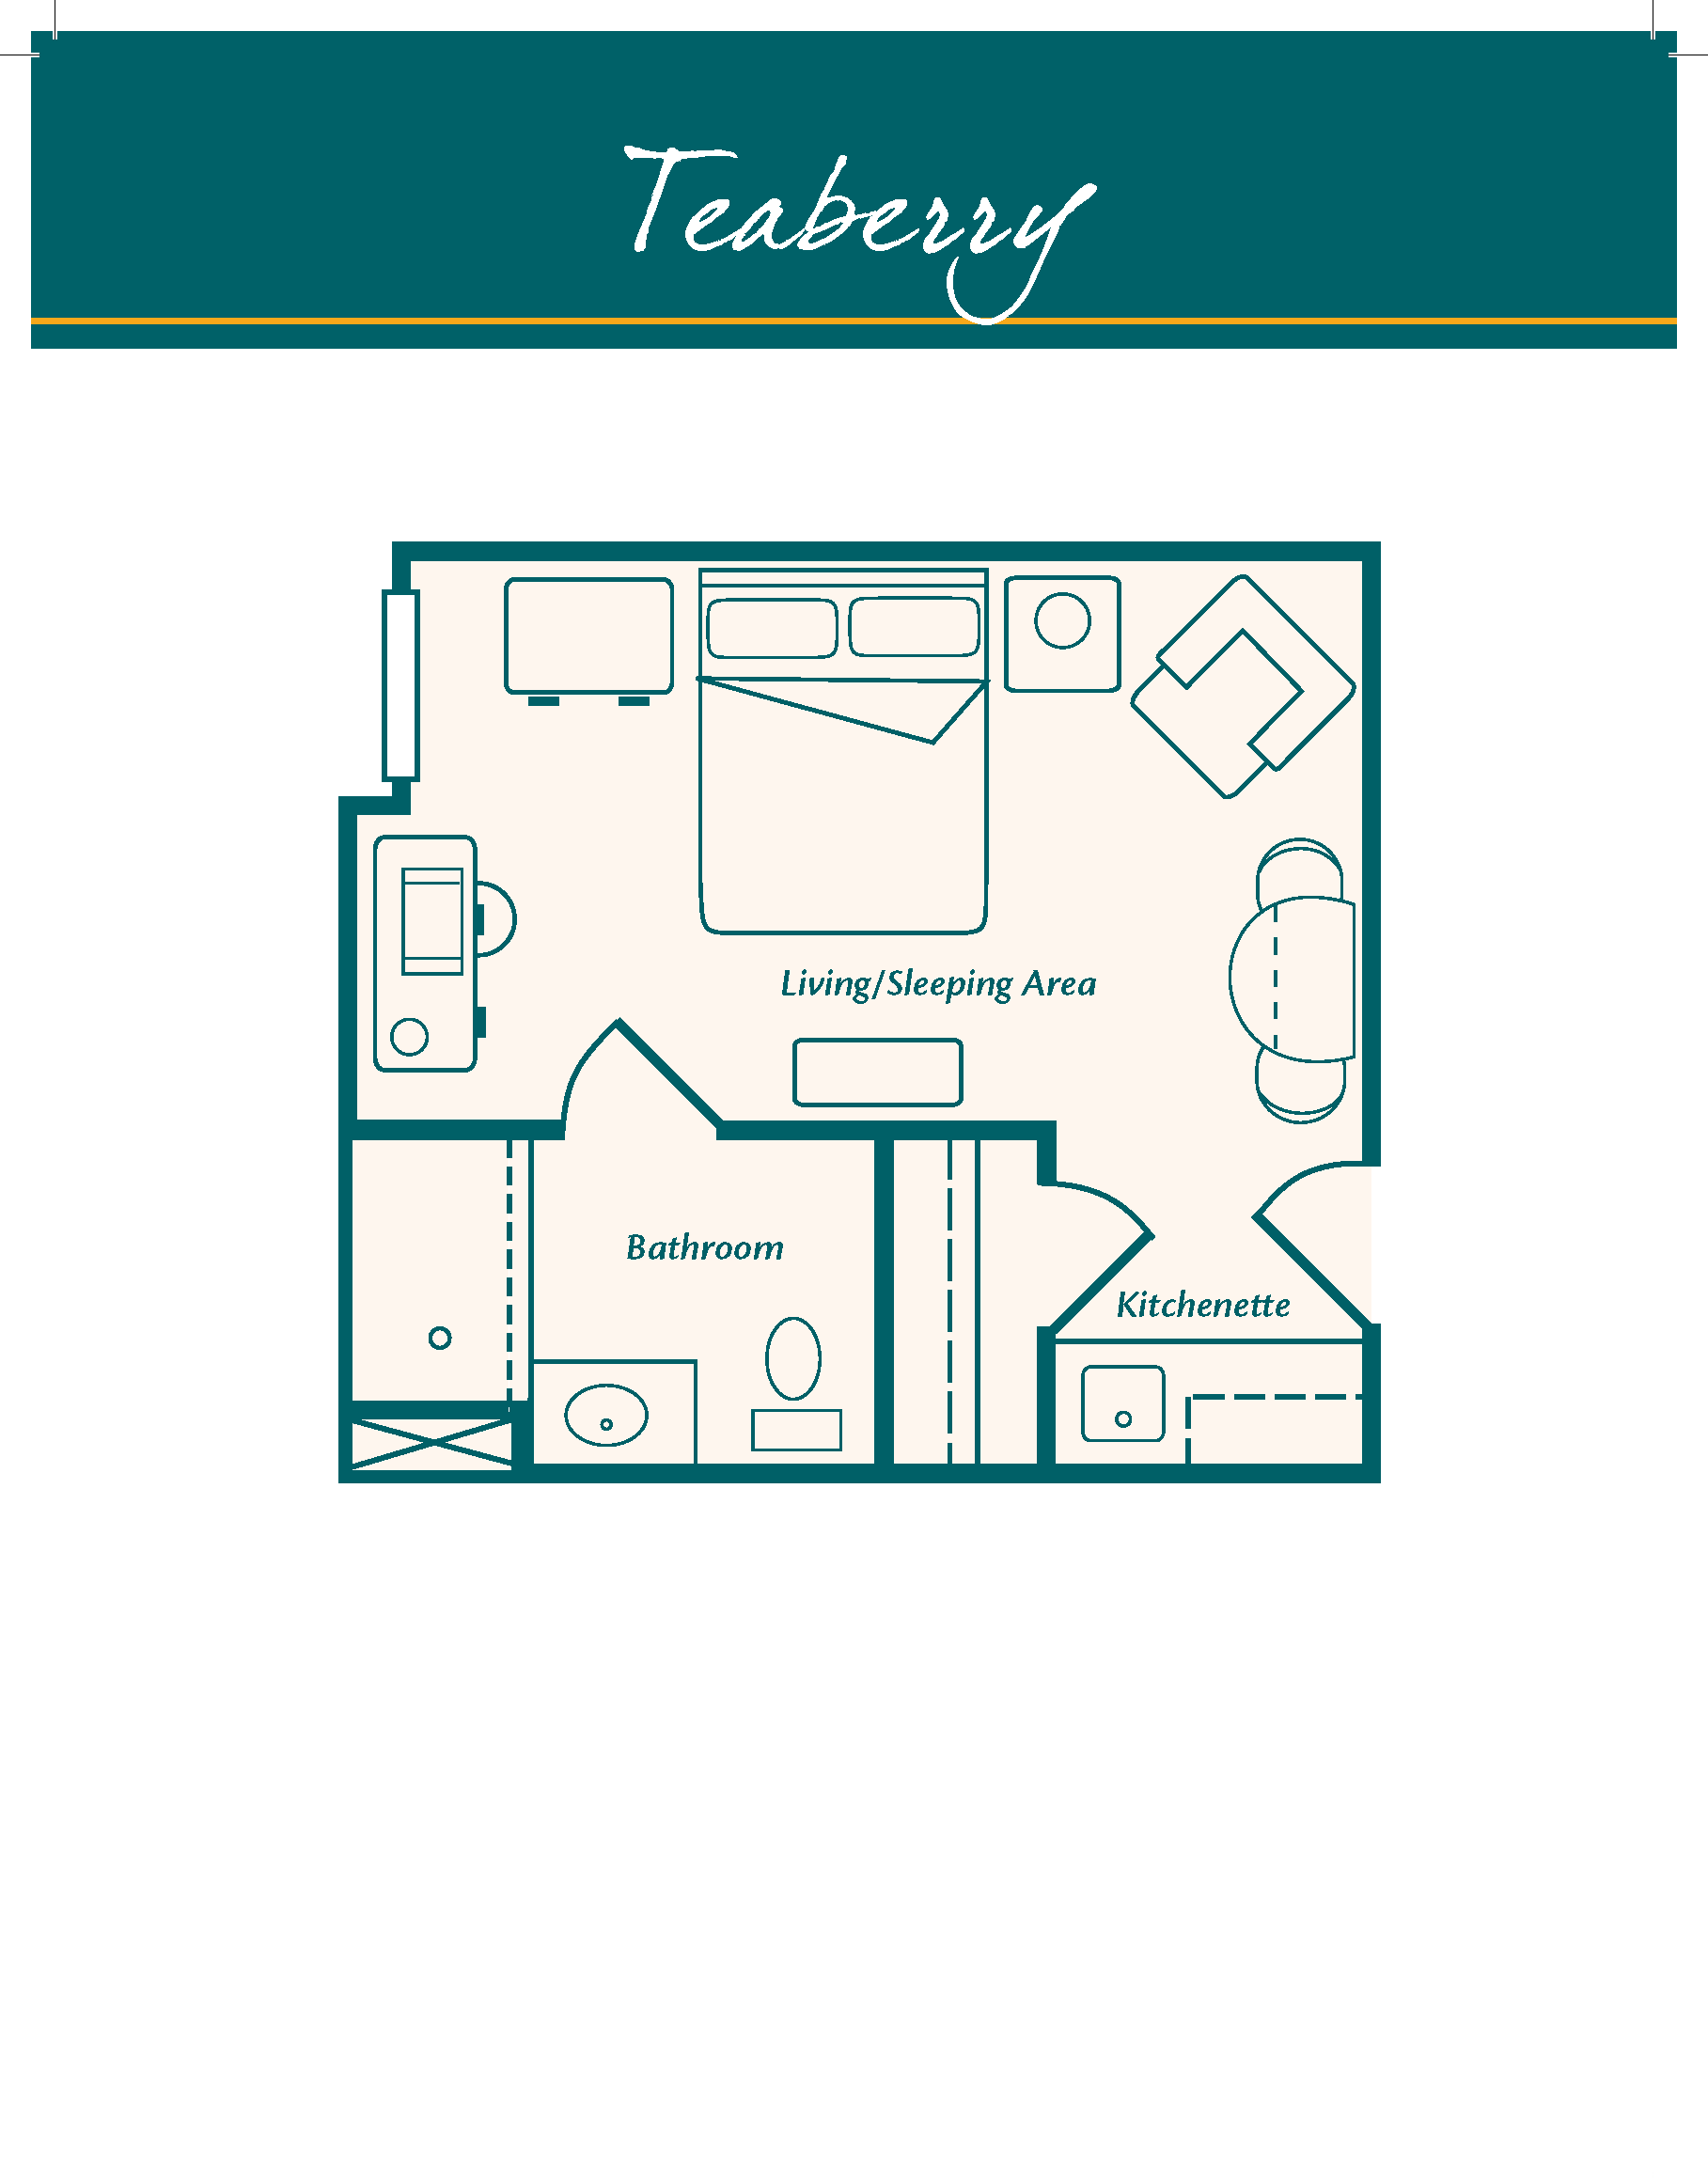 HarborChase of Gainesville Floor Plan-teaberry